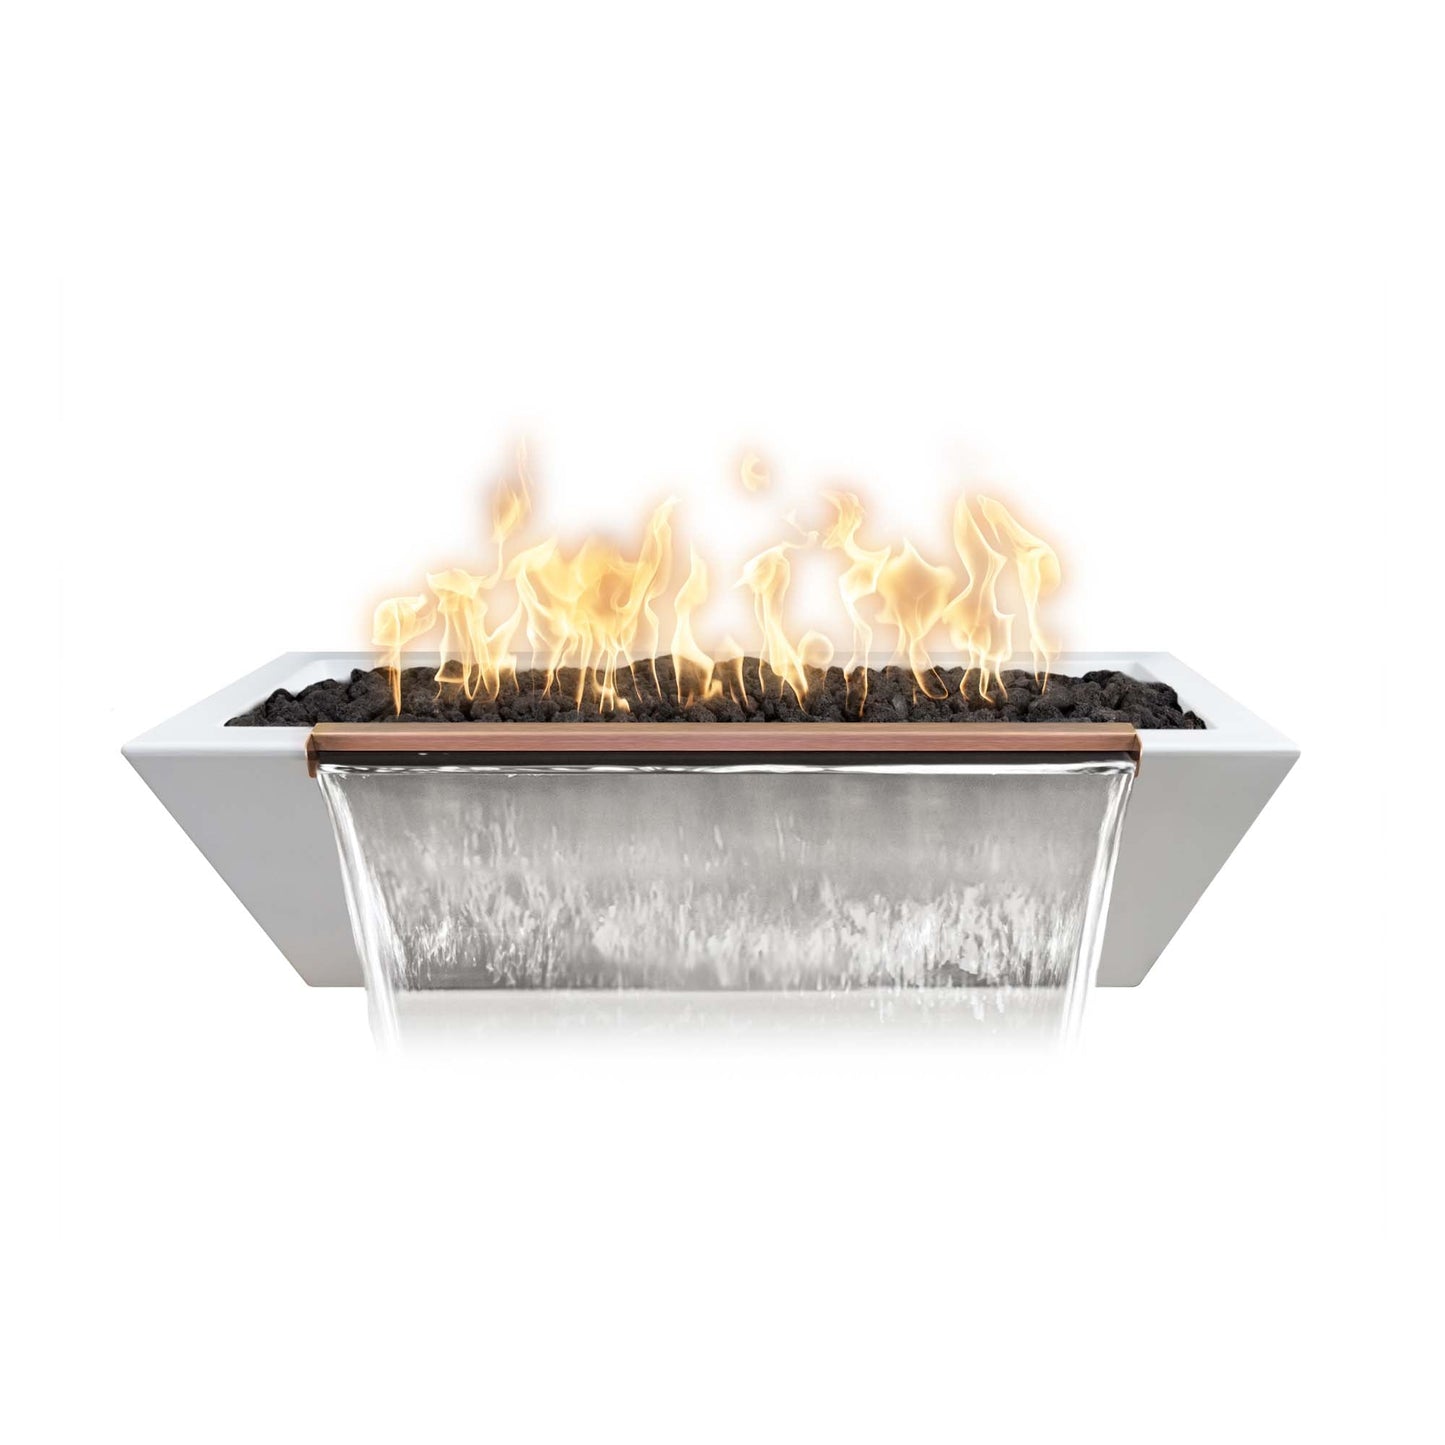 The Outdoor Plus Linear Maya 72" Brown GFRC Concrete Liquid Propane Fire & Water Bowl with Match Lit Ignition